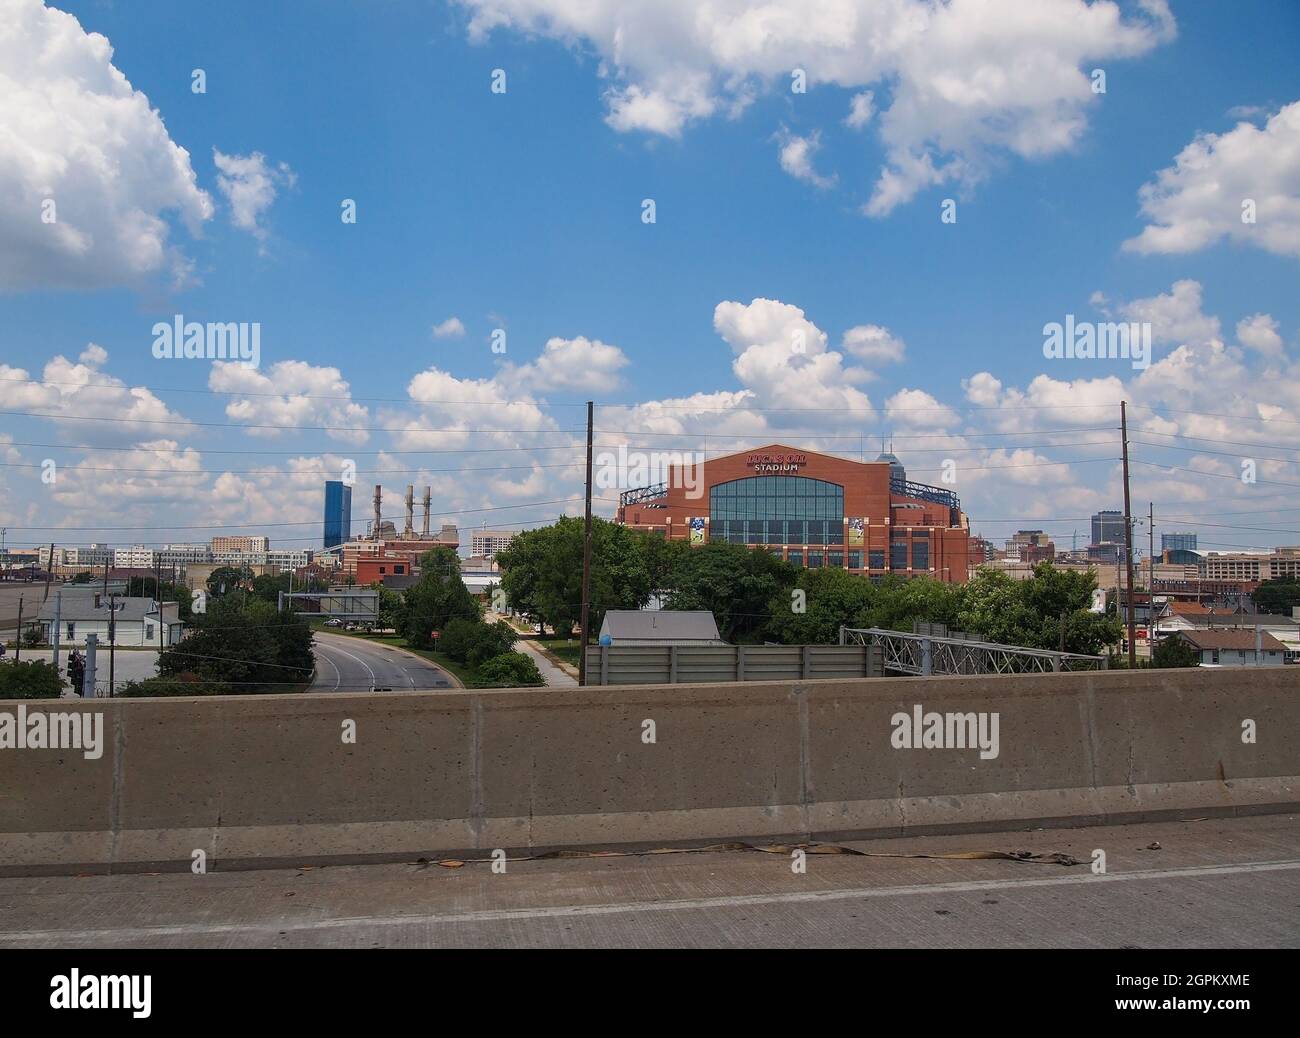 INDIANAPOLIS, INDIANA - JULY 8, 2018: Lucas Oil Stadium, home of the Indianapolis Colts football team, surrounded by dowtown Indianapolis, is viewed f Stock Photo